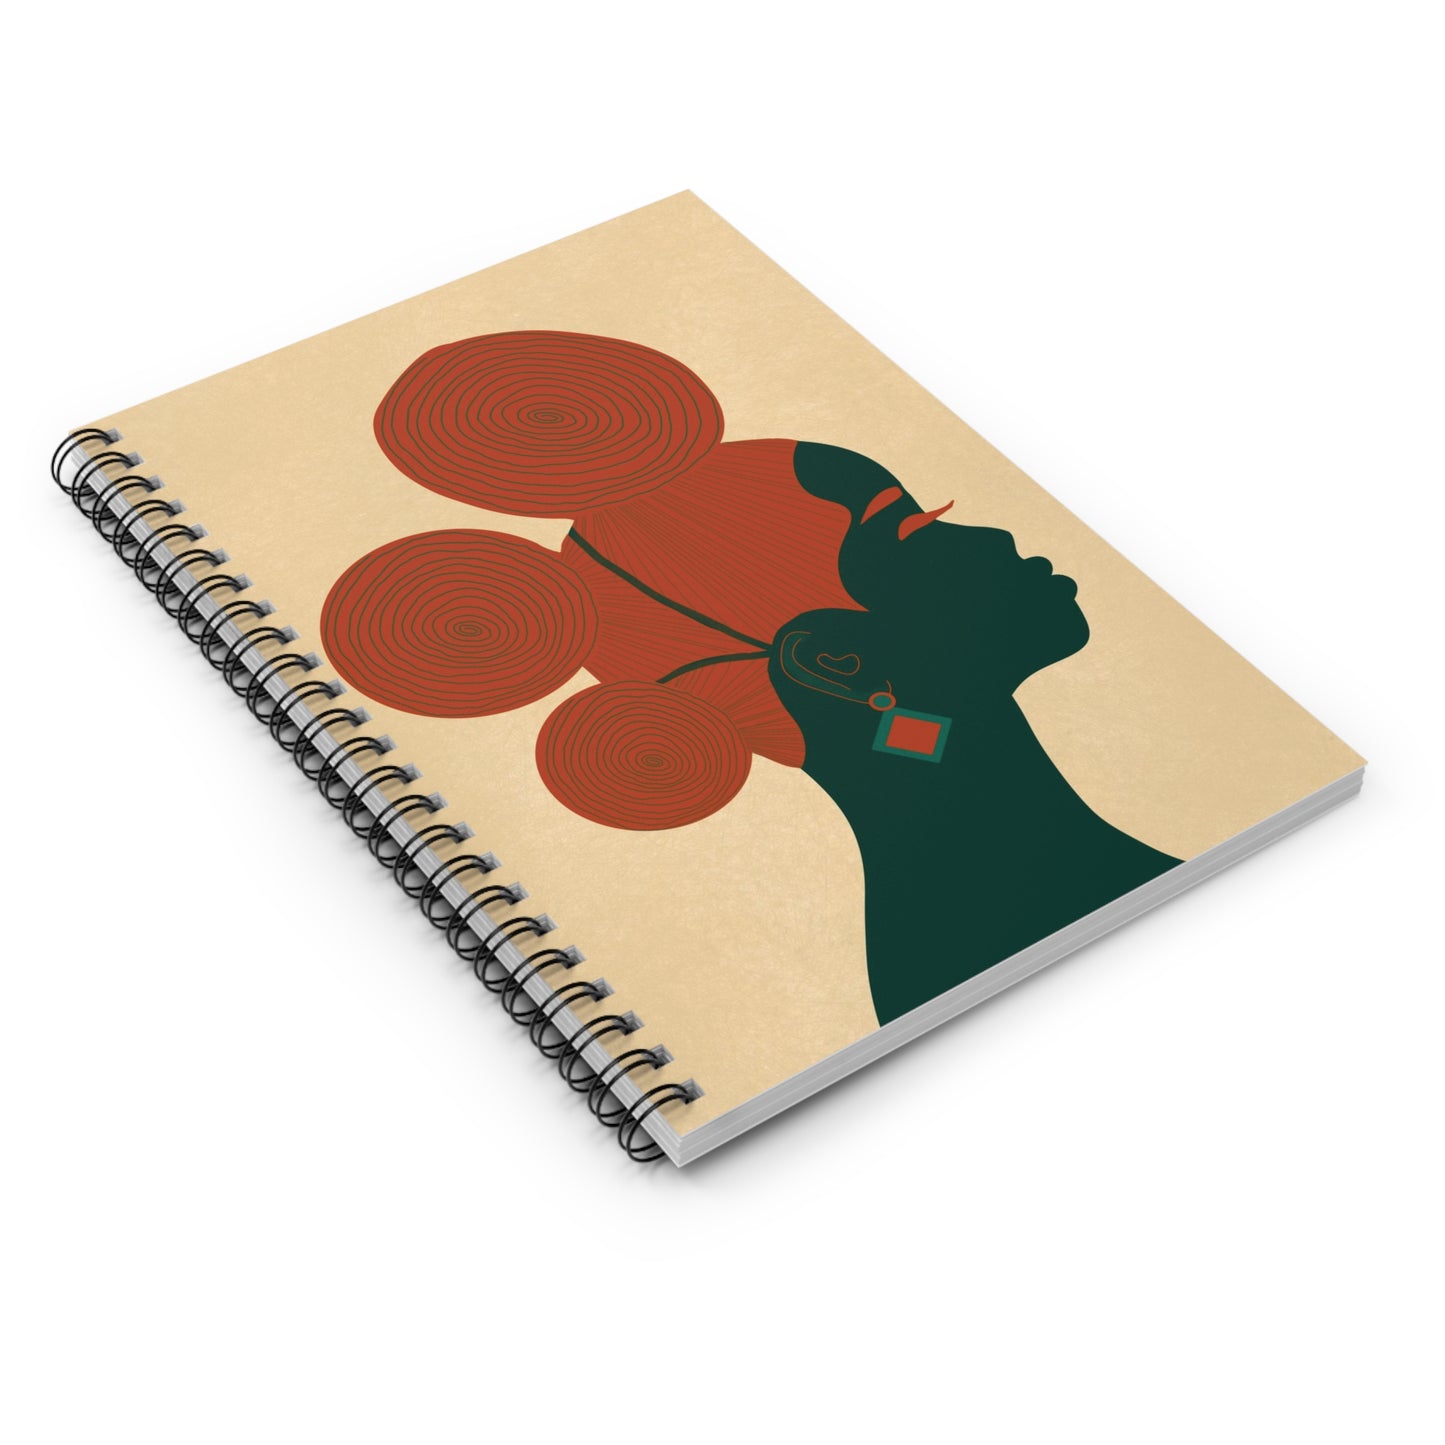 Three Buns Spiral Notebook - Ruled Line "Don't Touch My Hair Collection"